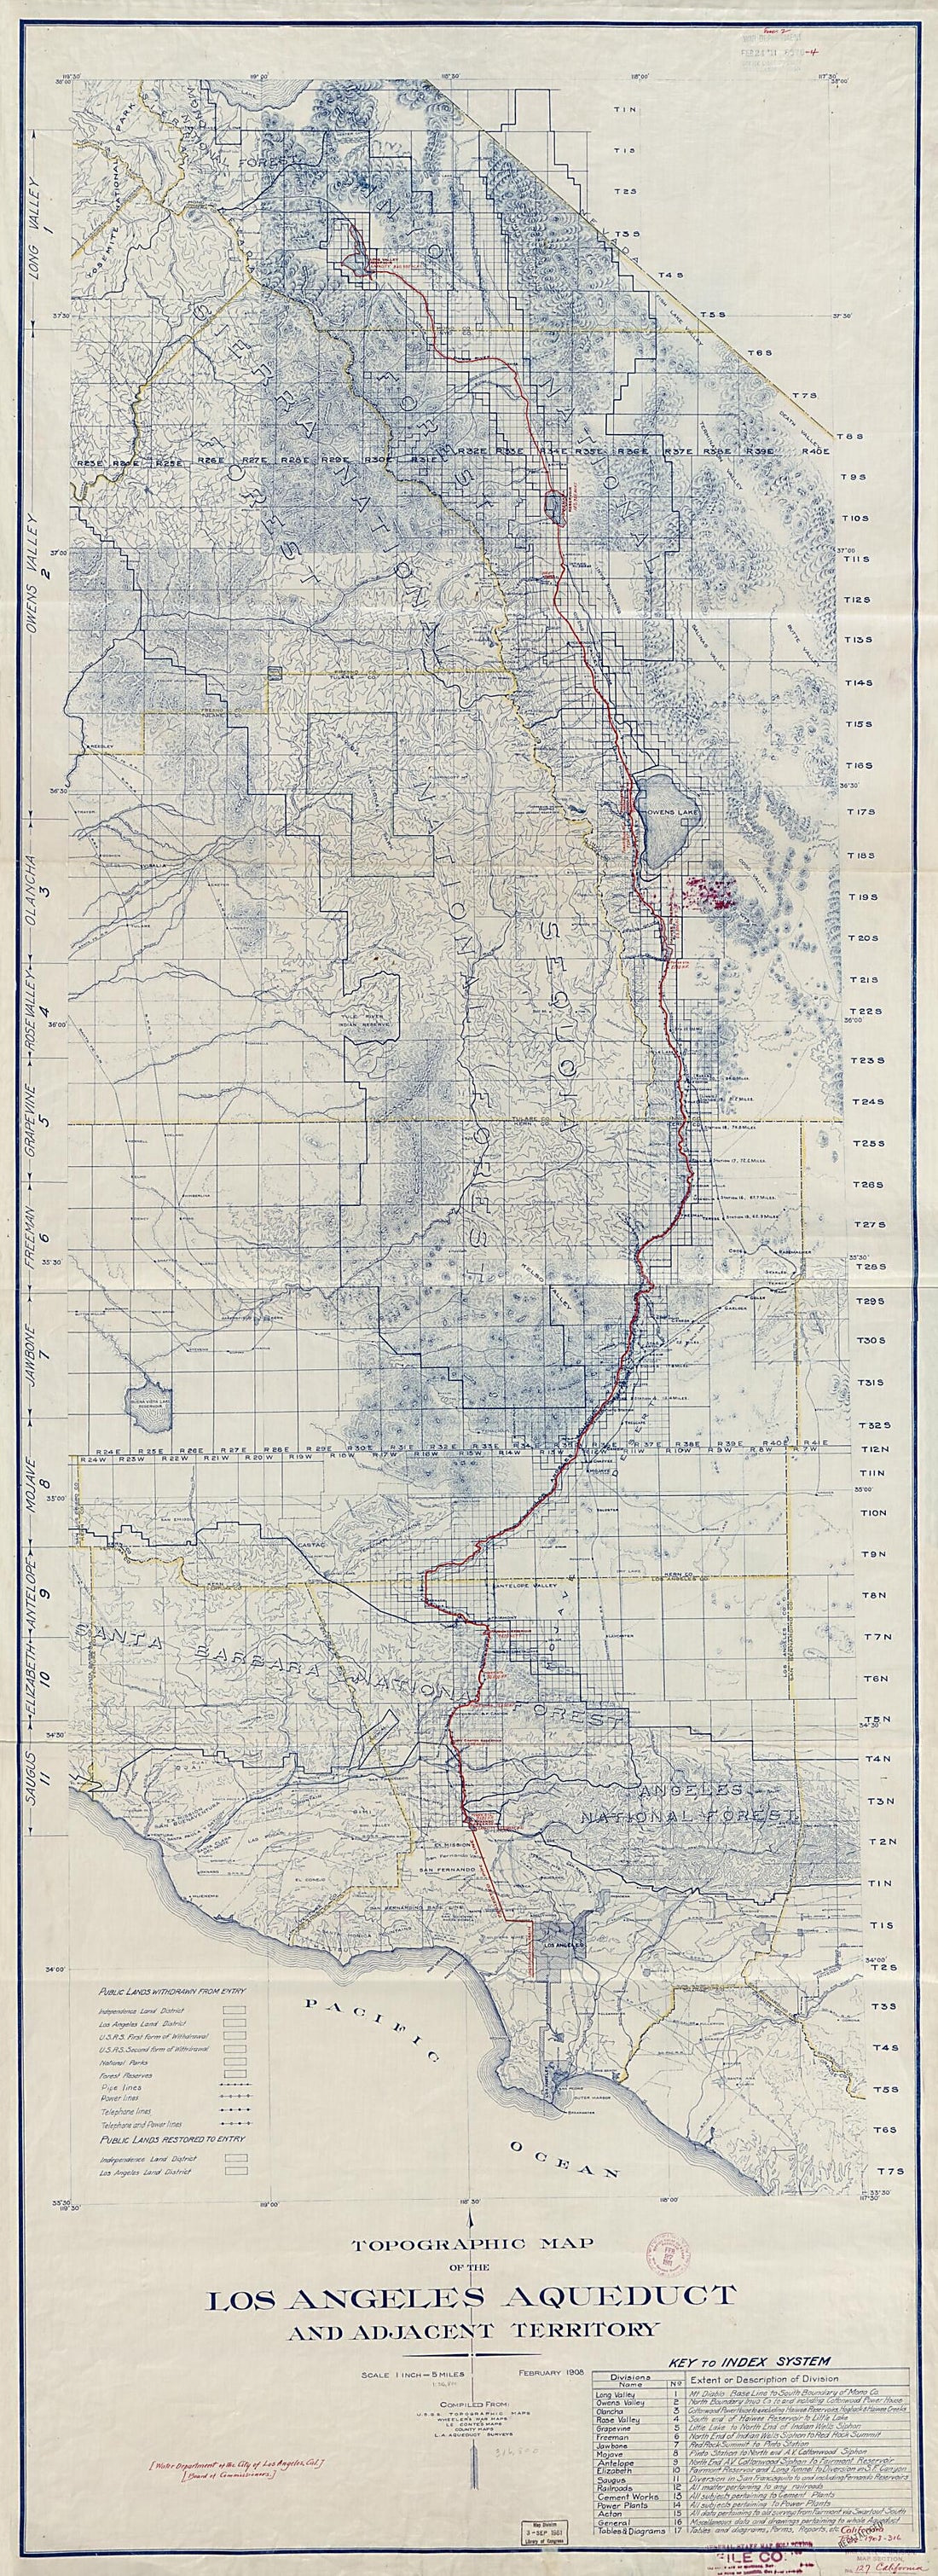 This old map of Topographic Map of the Los Angeles Aqueduct and Adjacent Territory from 1908 was created by  City of Los Angeles Board of Water and Power Commissioners in 1908